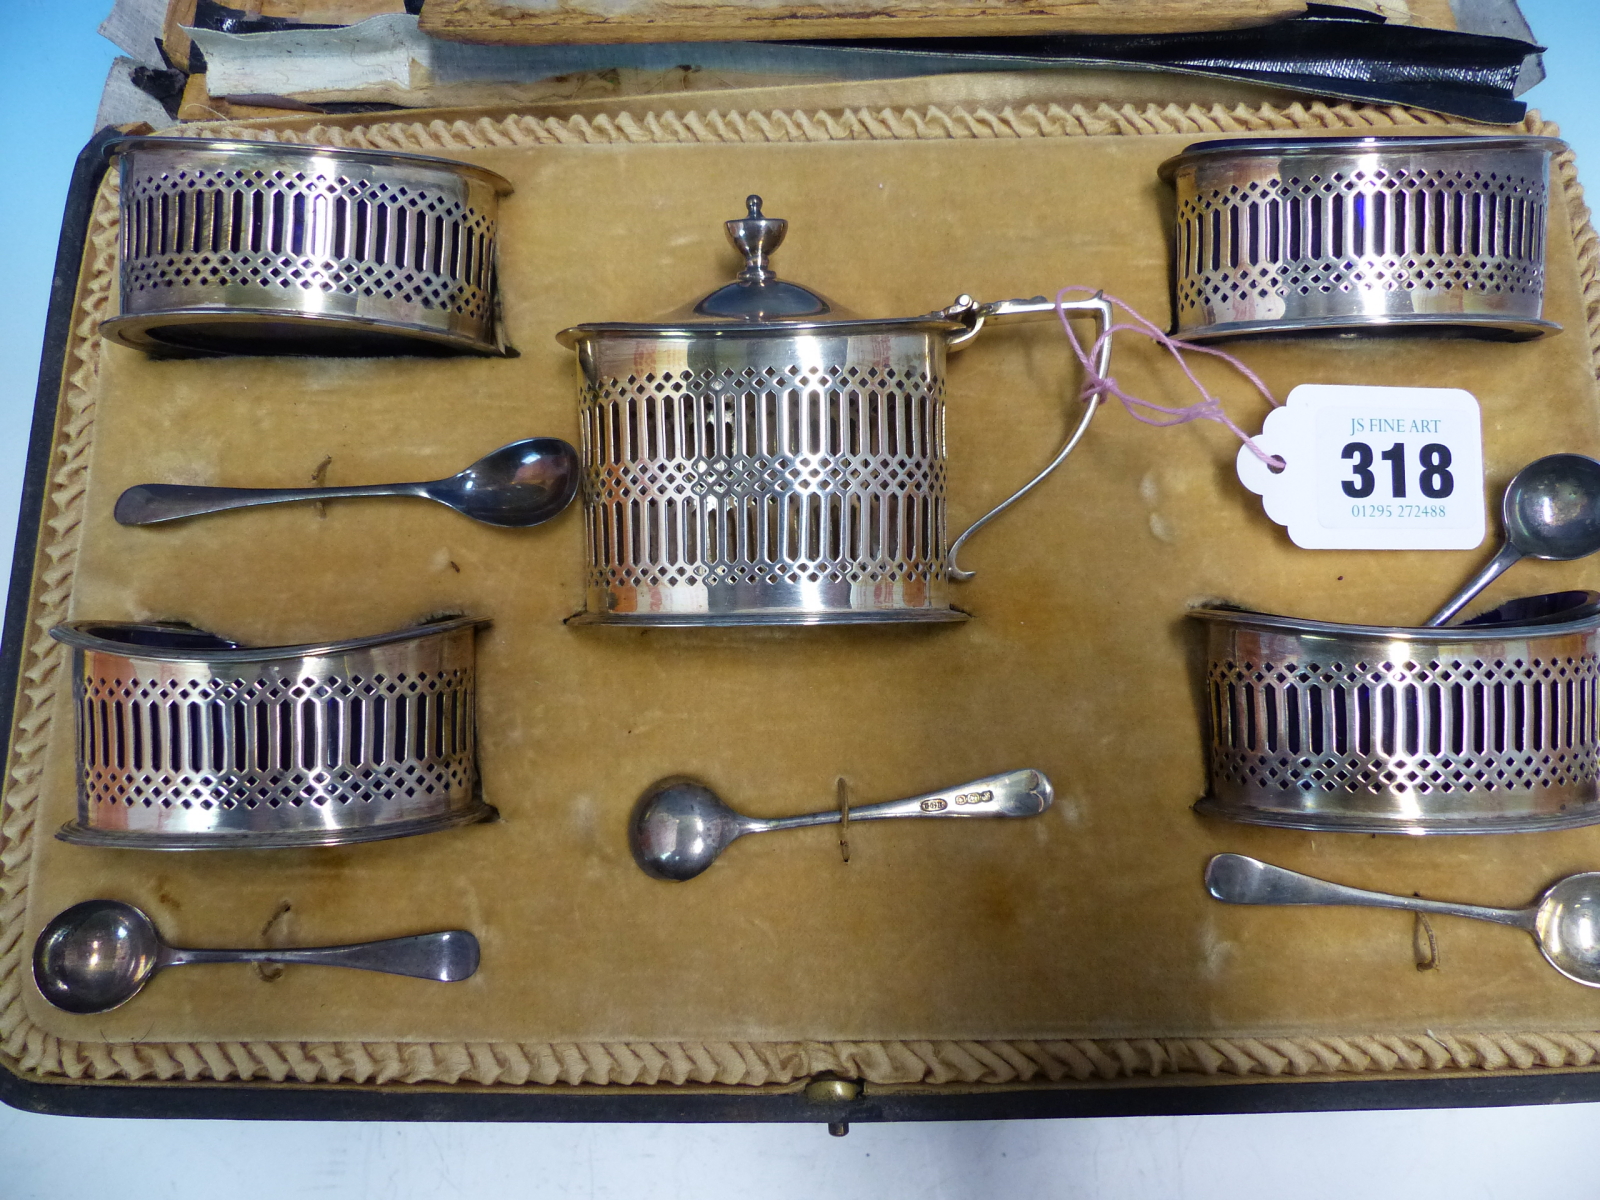 A CASED HALLMARKED SILVER FIVE PIECE CRUET SET WITH ASSOCIATED SPOONS.